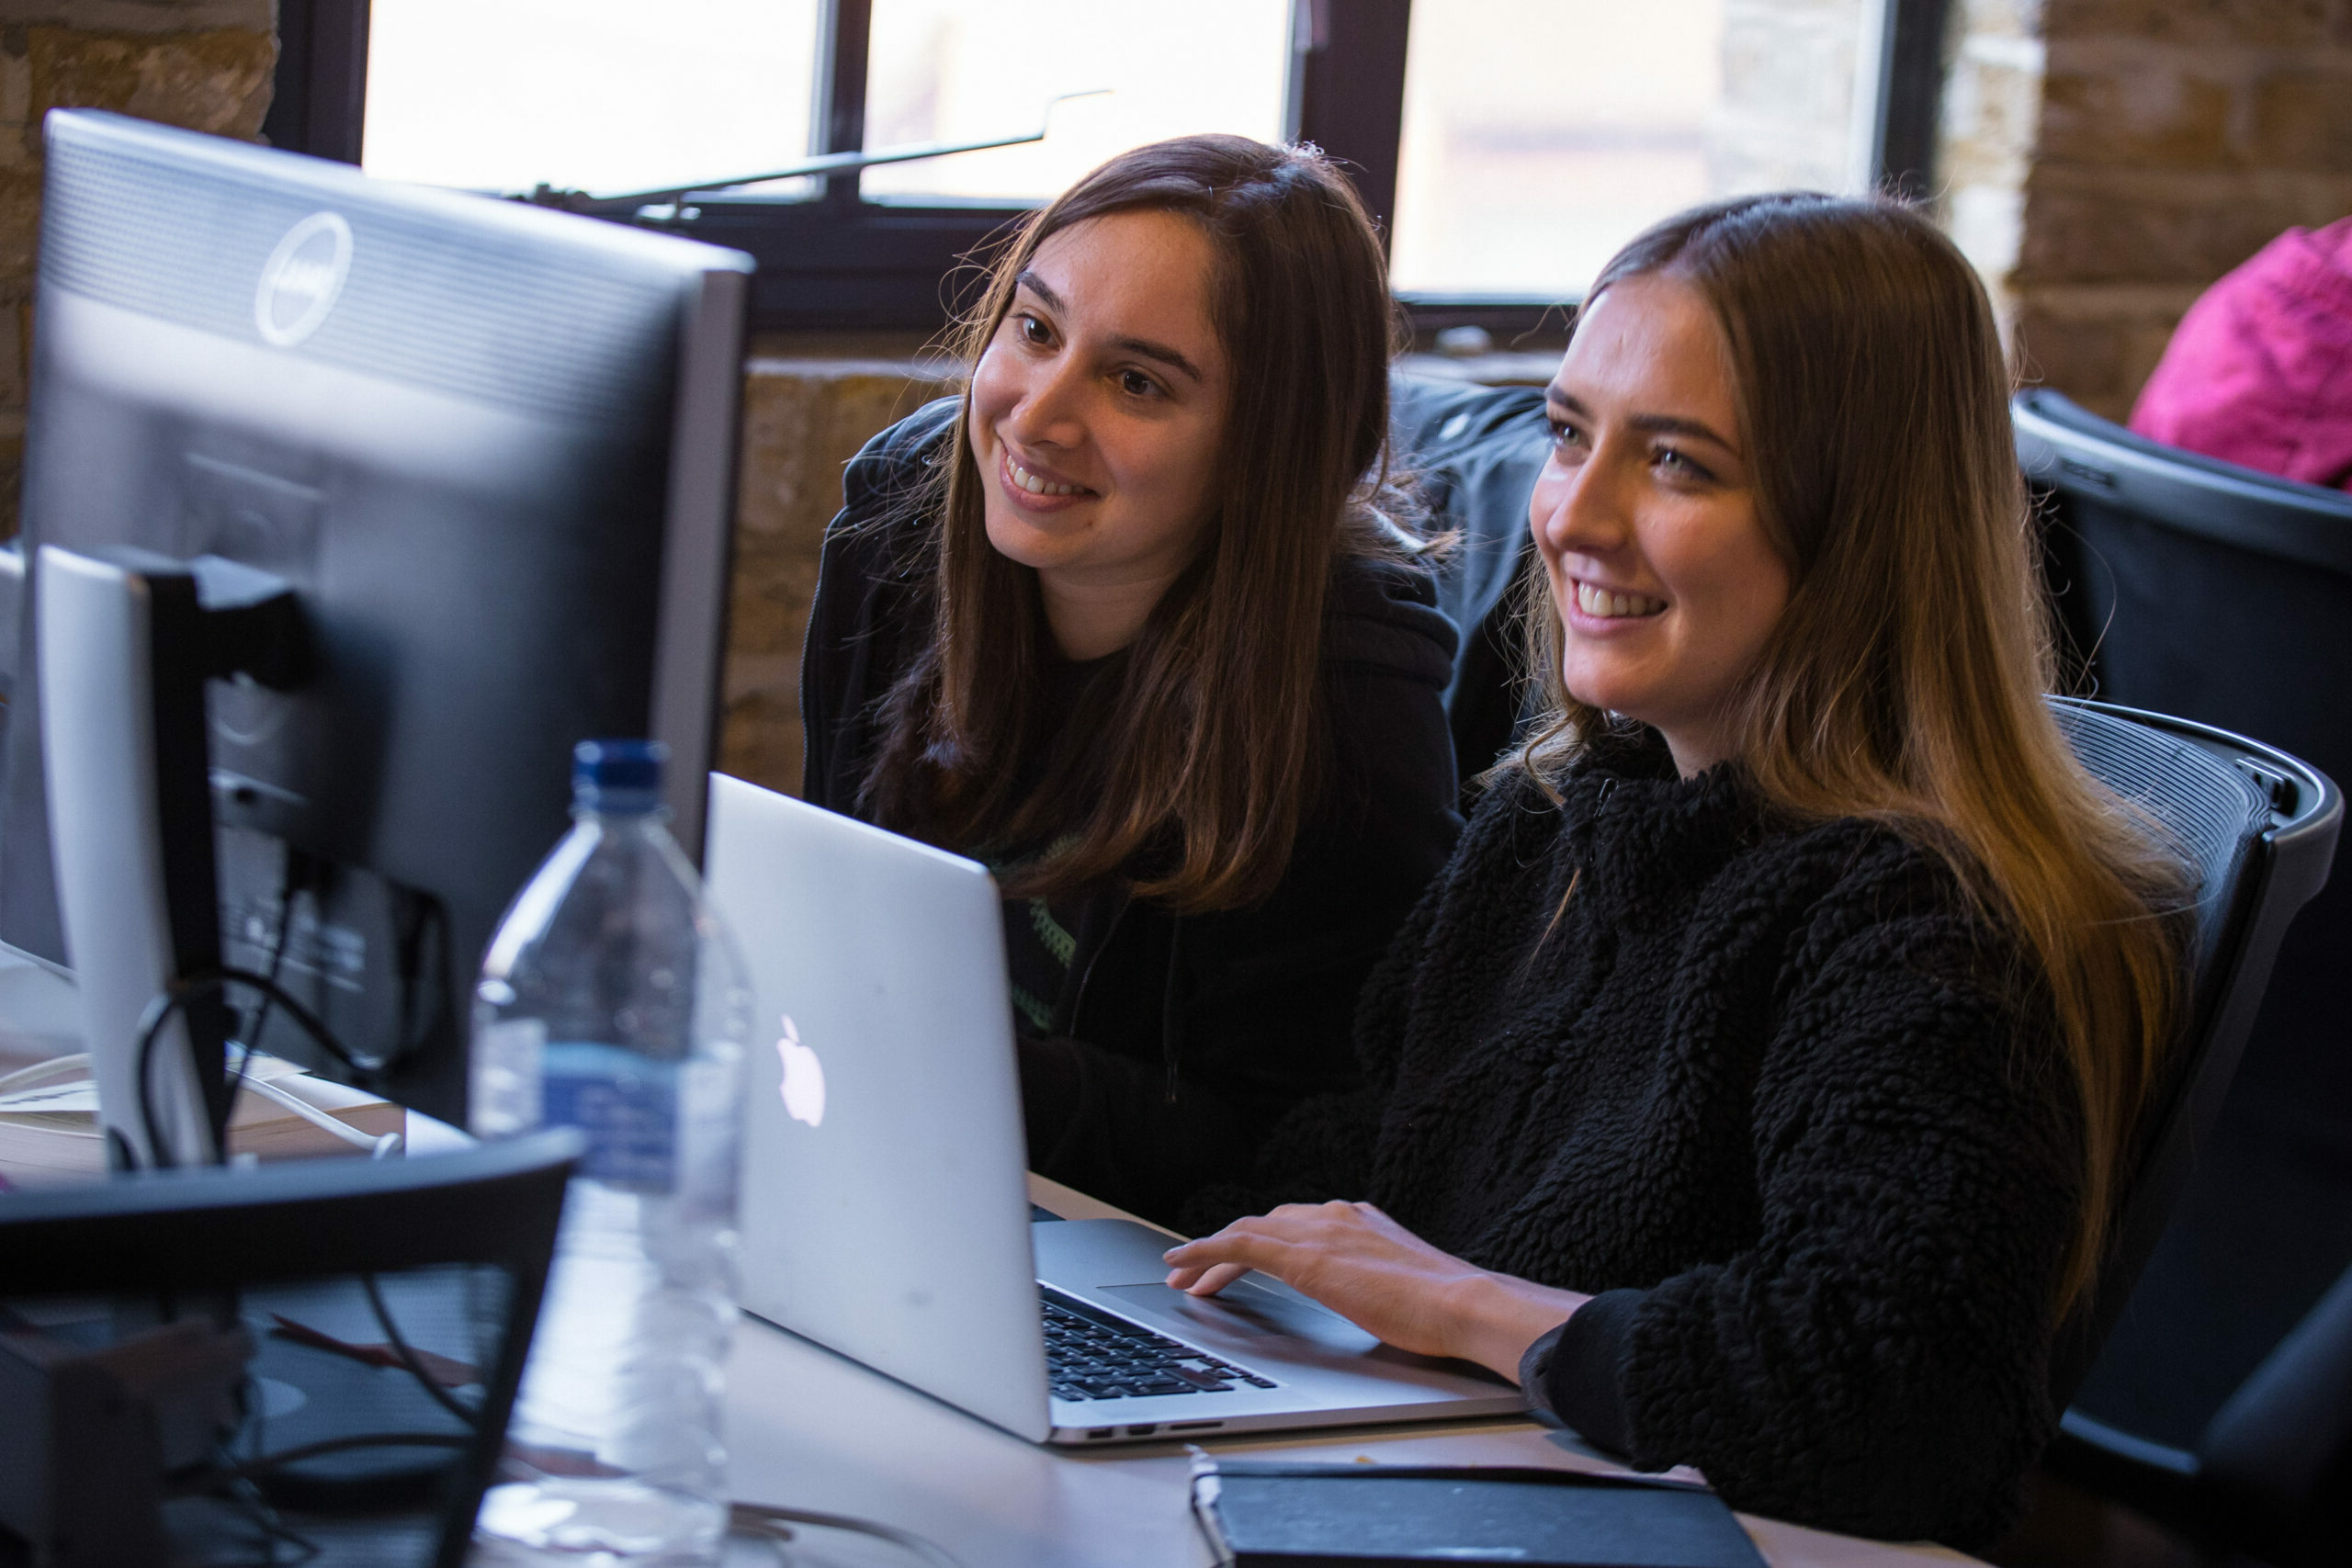 Two women coding together